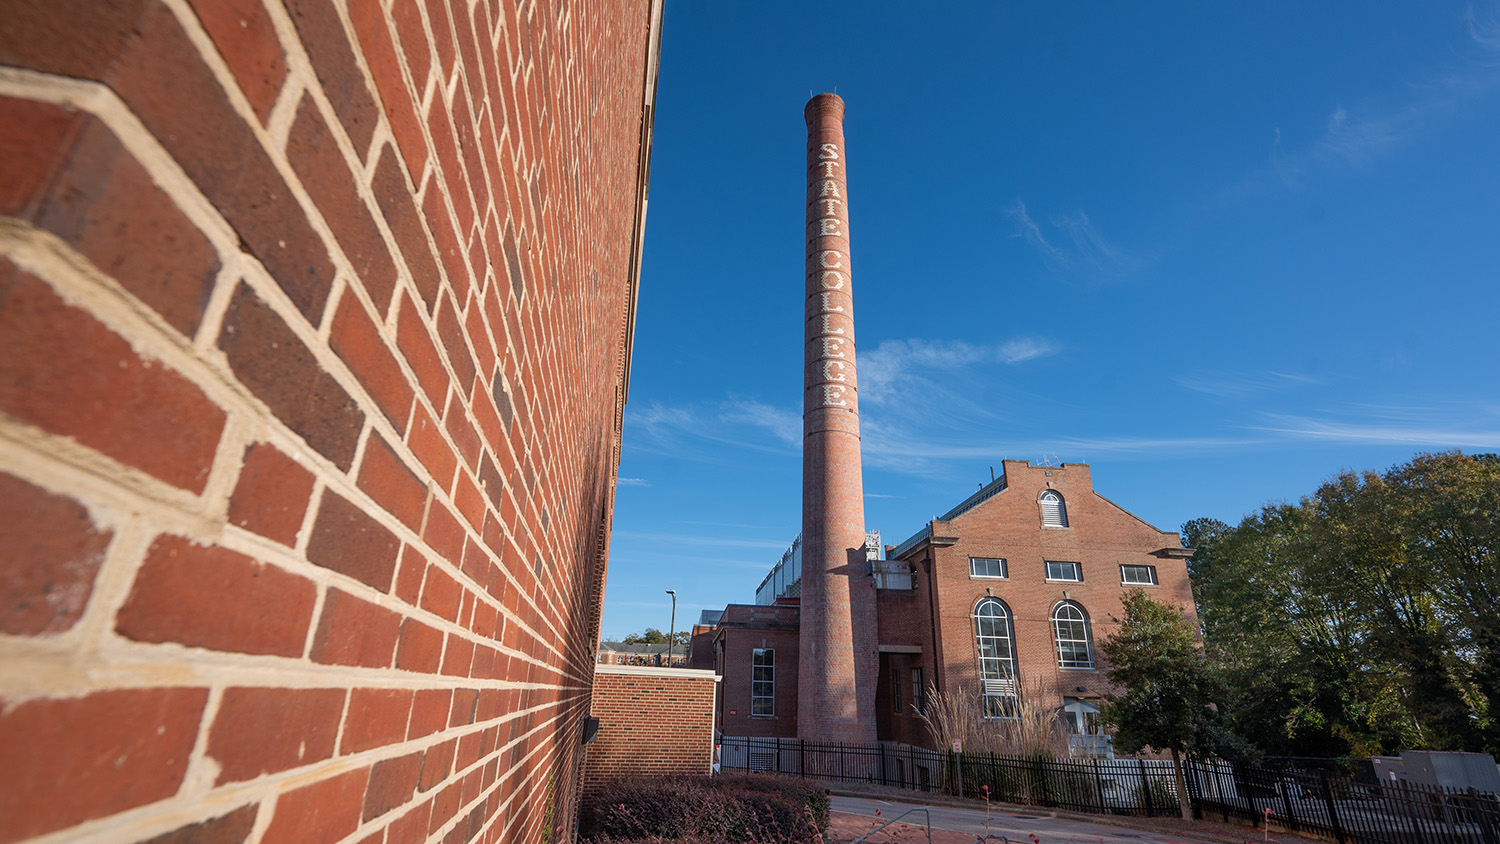 The Yarbrough Drive Steam Plant and Smokestack on a warm fall day